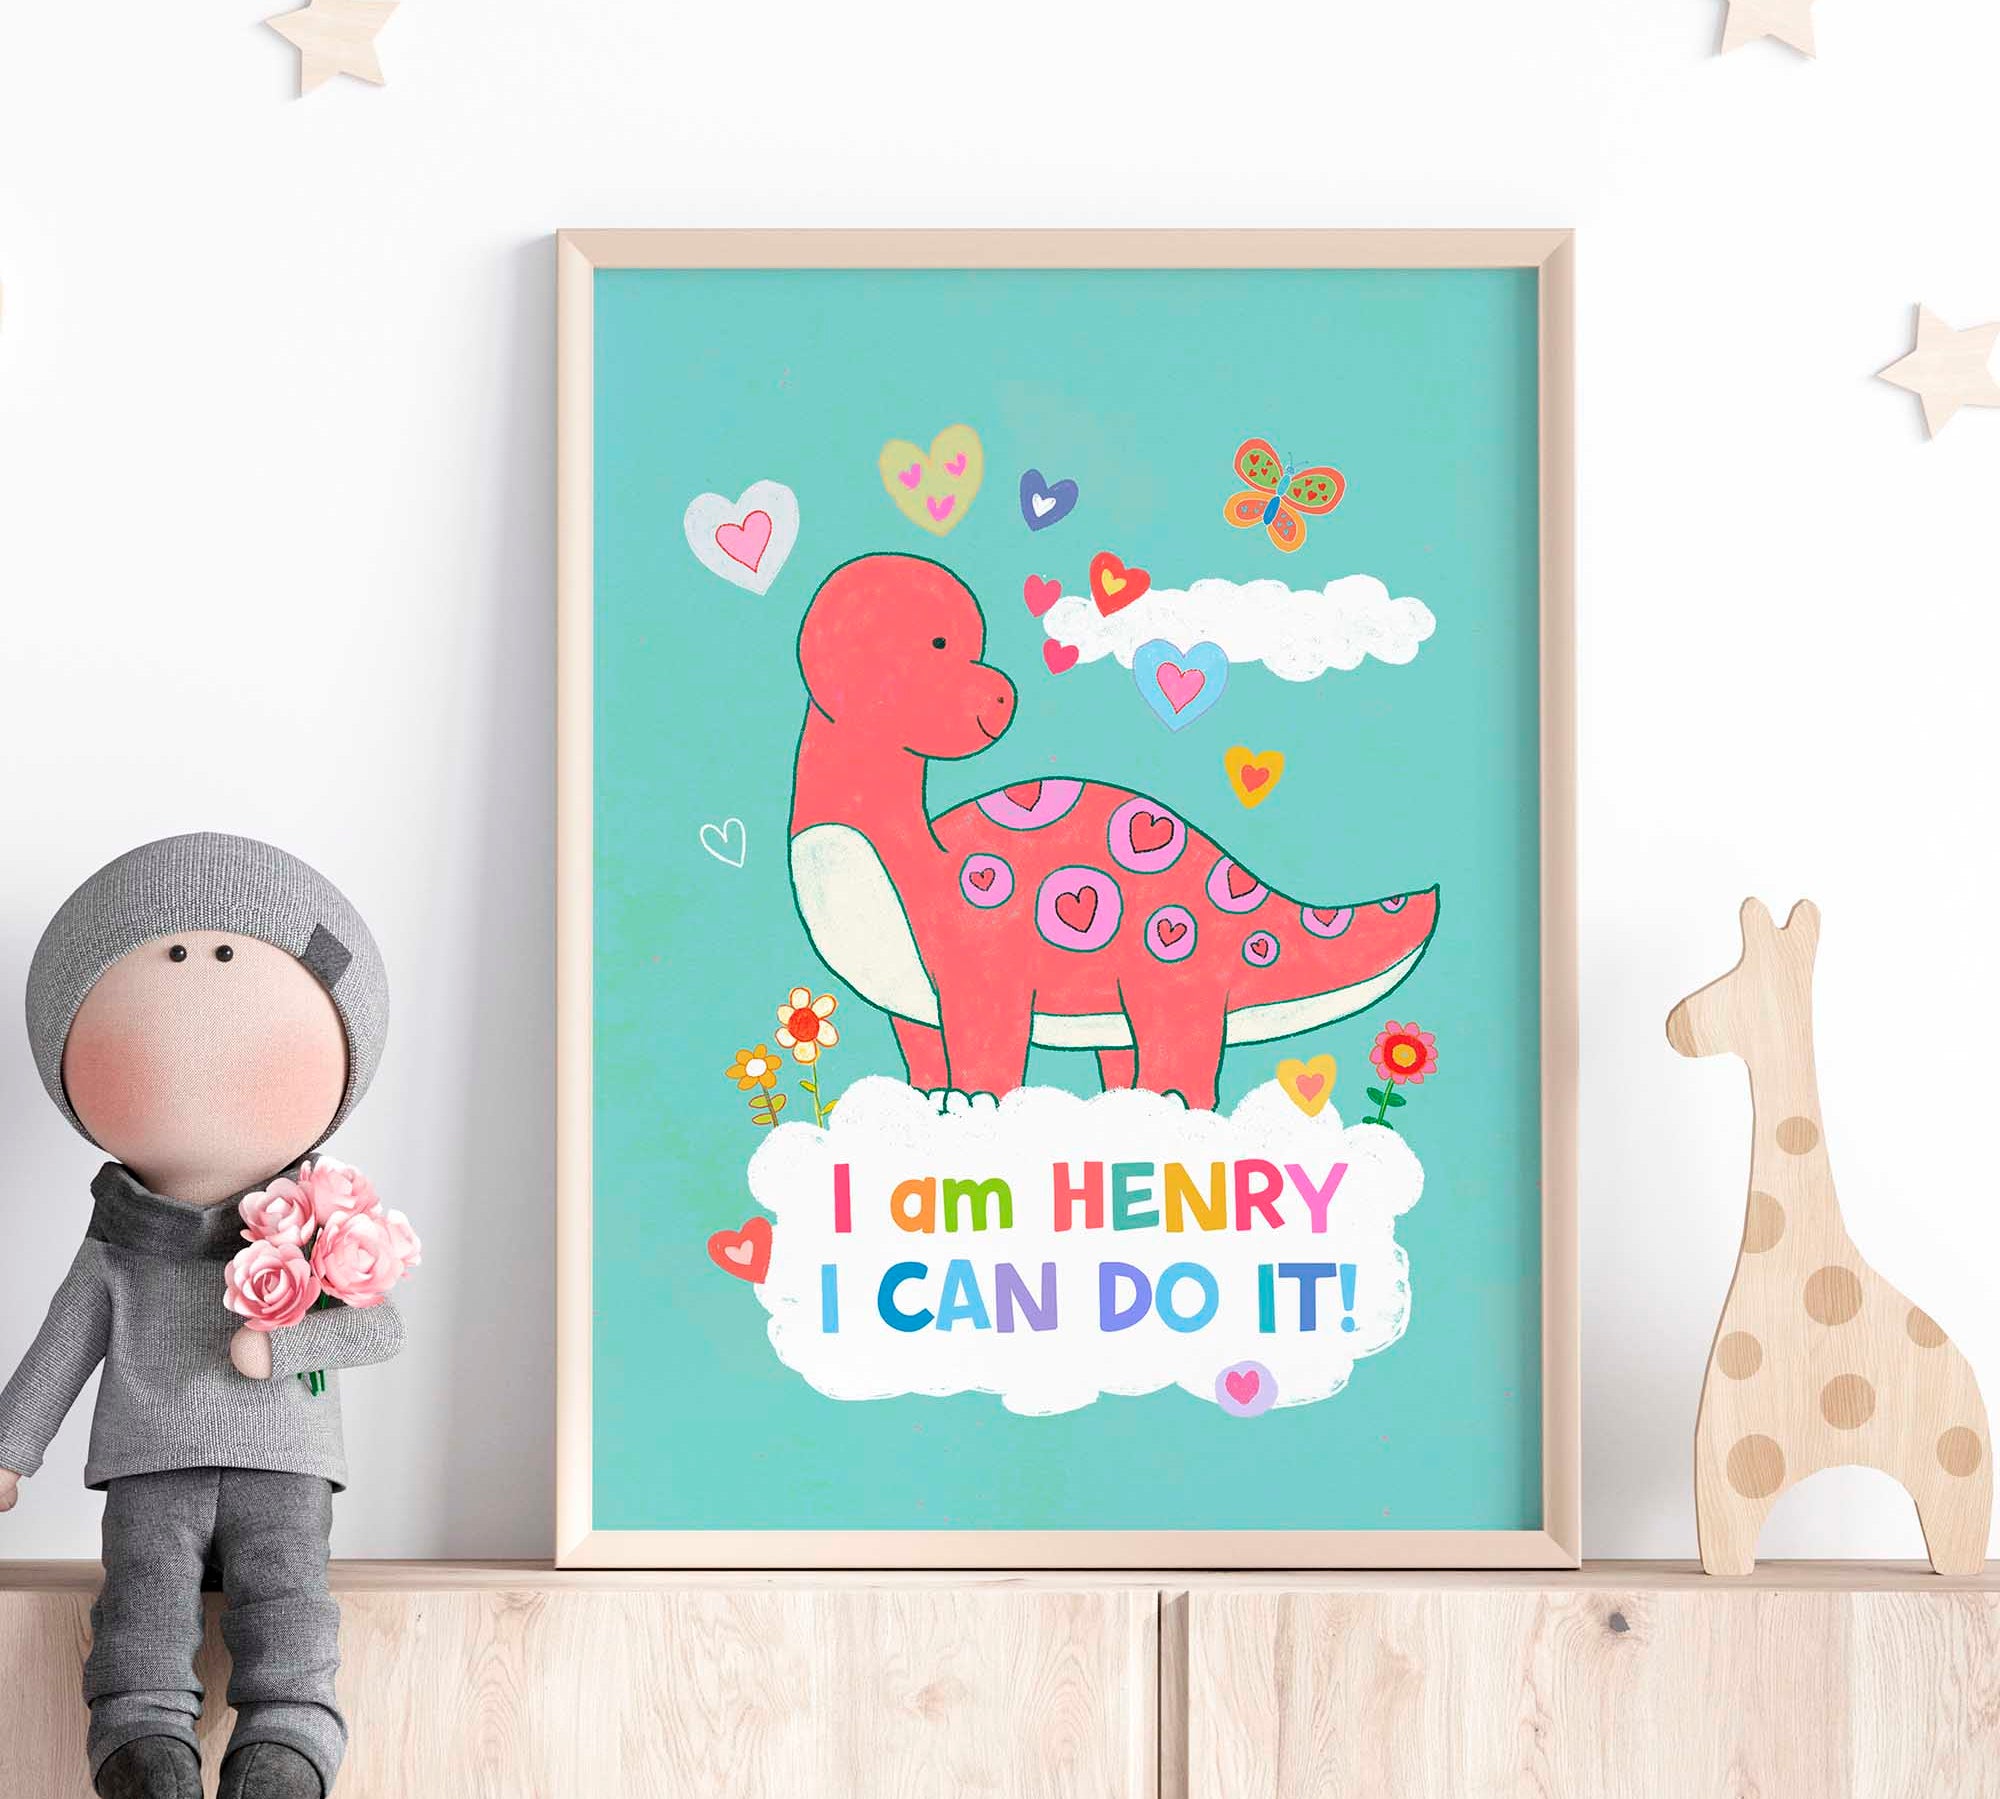 Enchanting dinosaur-themed kids' wall art with positive messages, ideal for decorating nurseries.